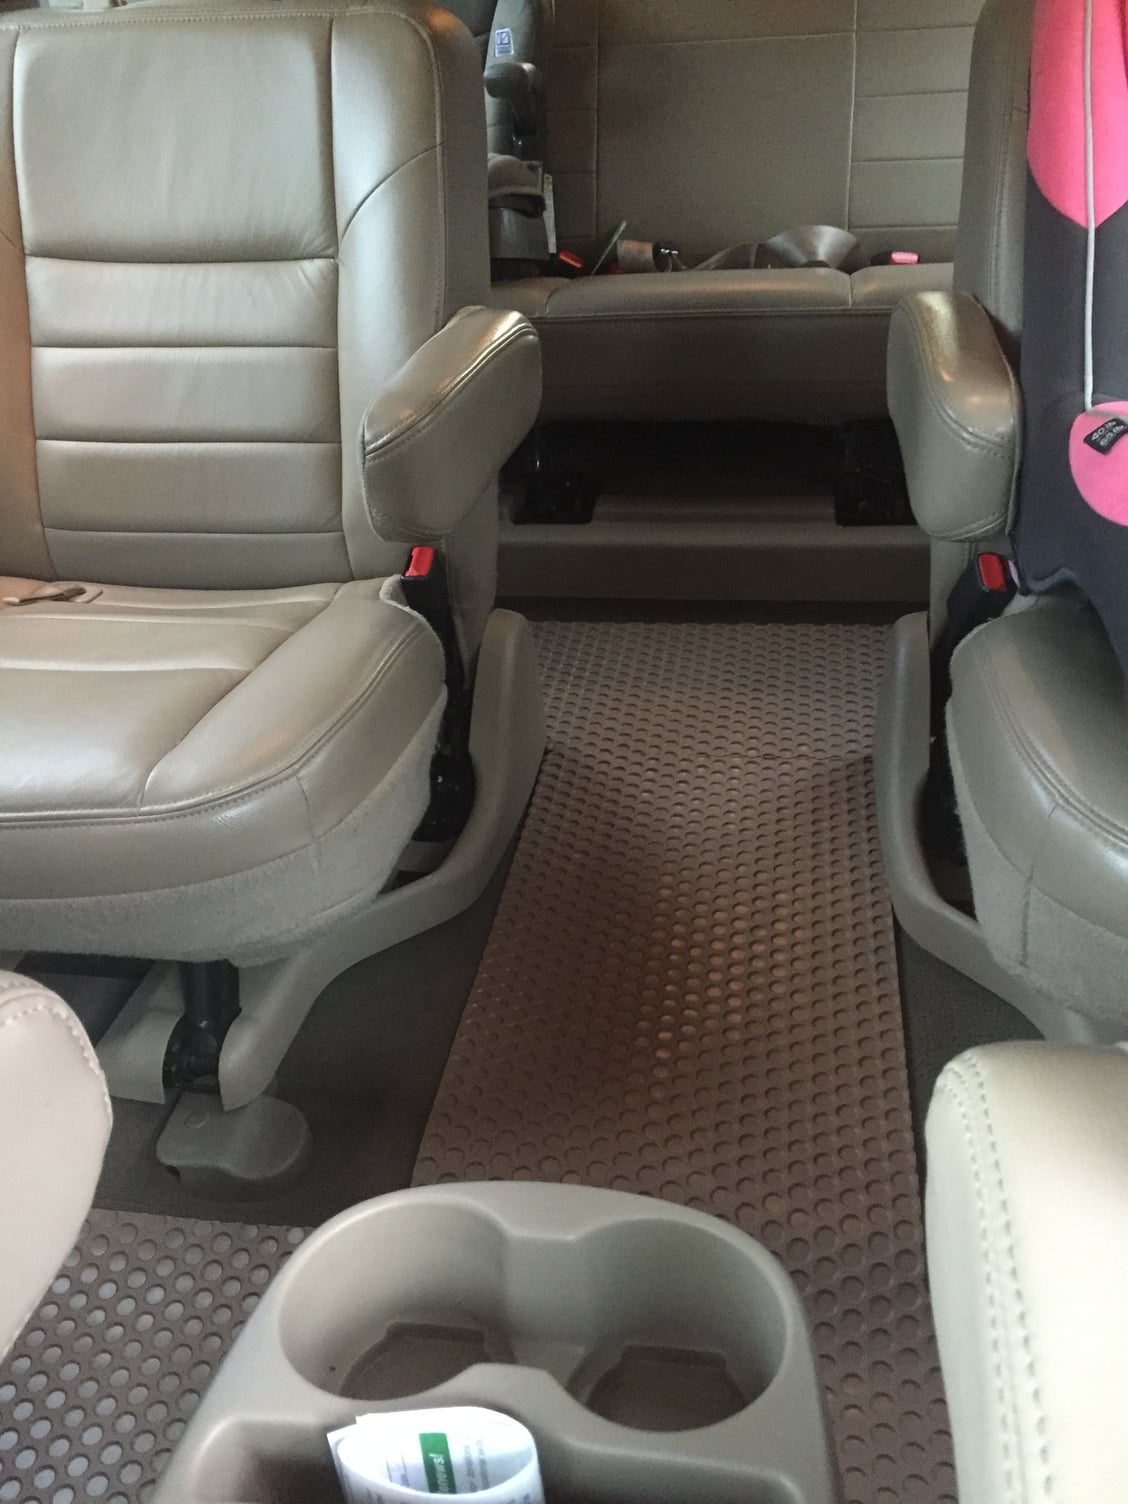 Floor Liners Floor Mats Revisited Ford Truck Enthusiasts Forums